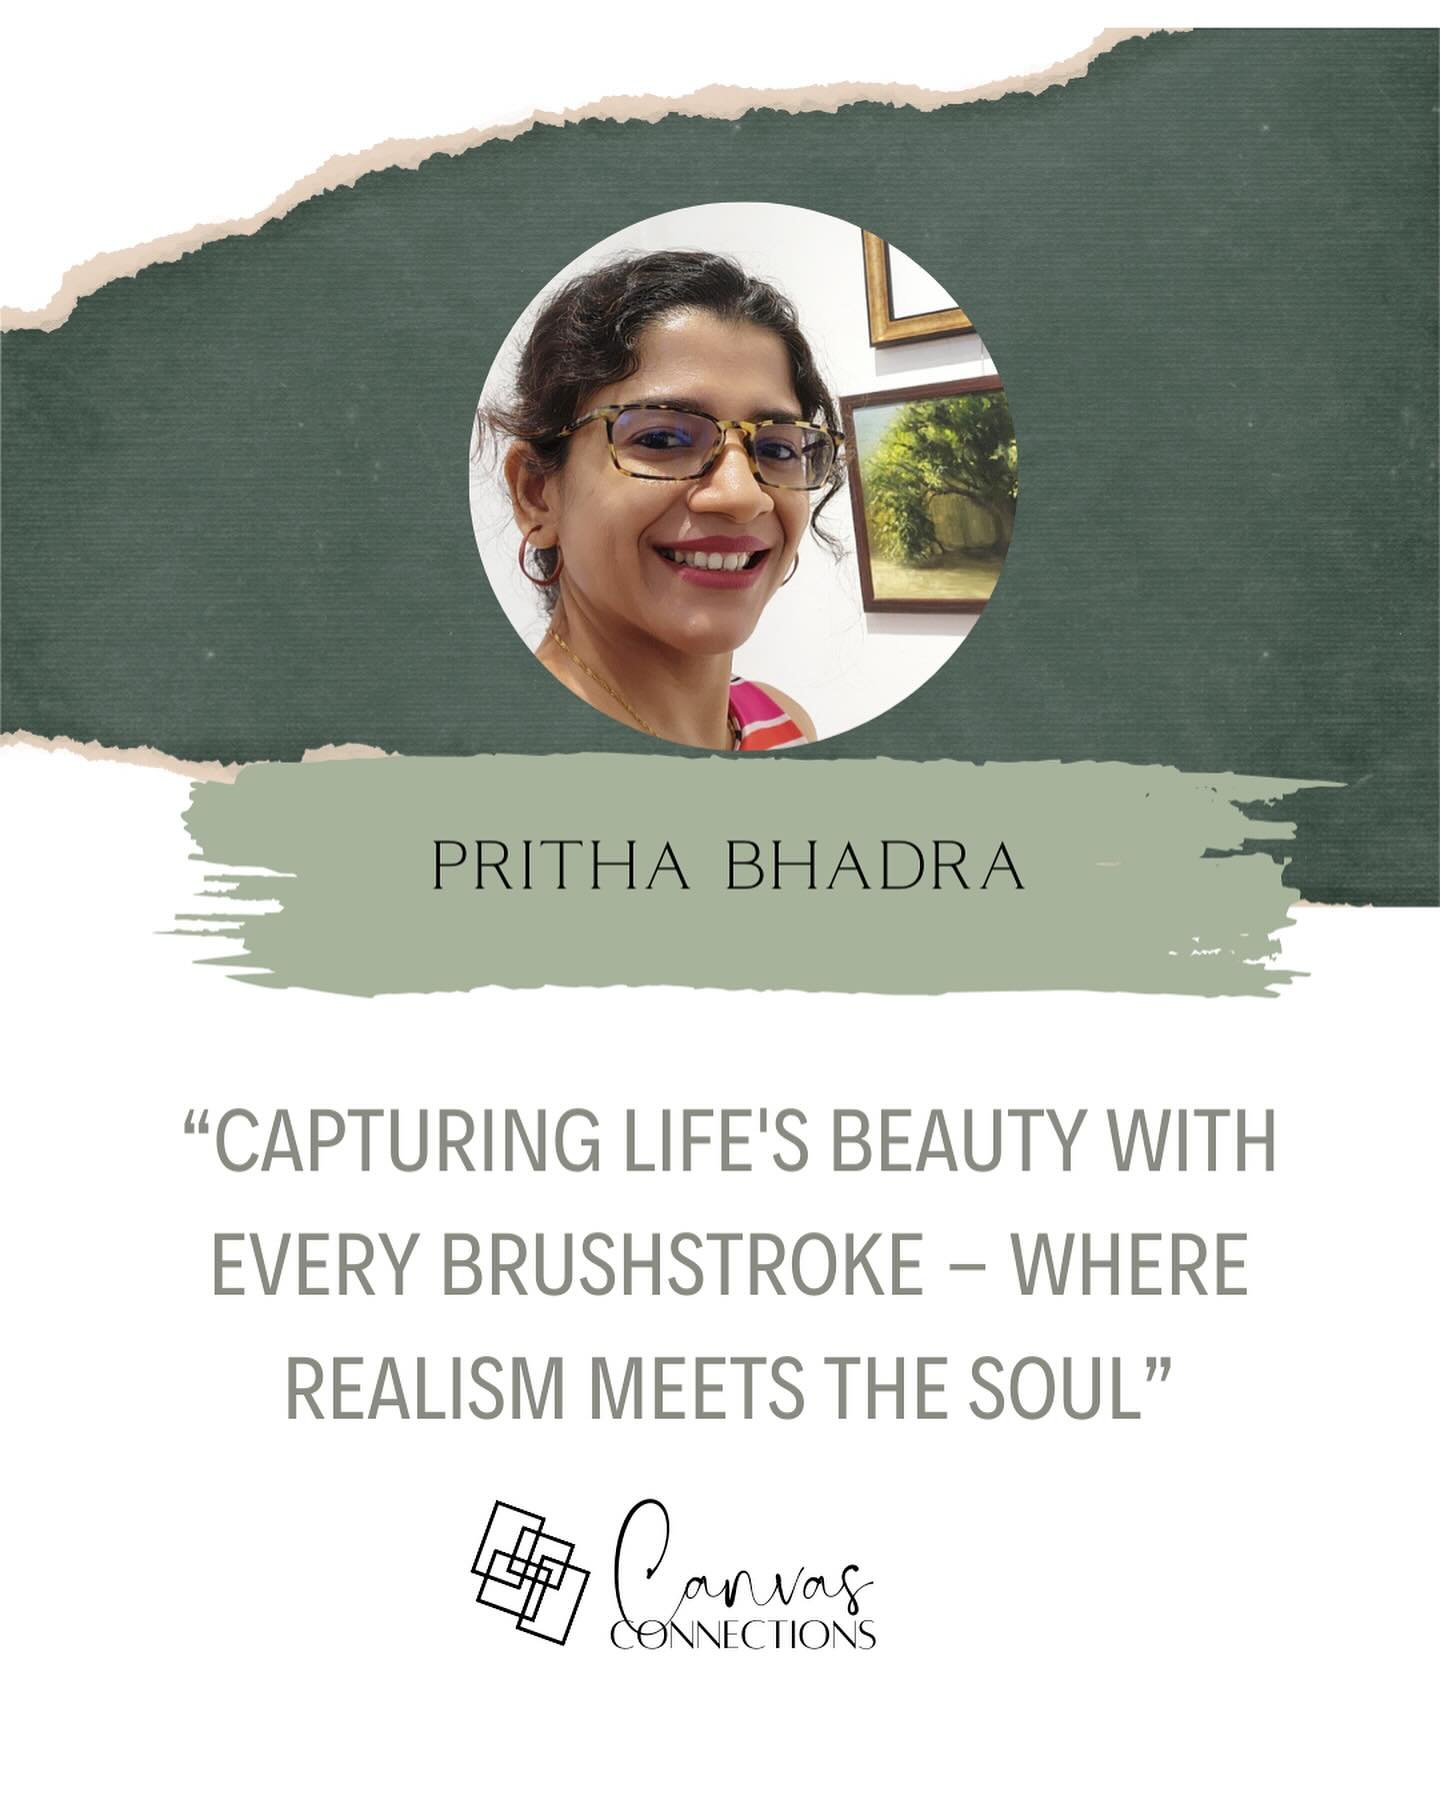 Pritha Bhadra
&ldquo;A classic realism artist, I draw and paint with oil, graphite and charcoal in the traditional realism style infused with a contemporary touch&rdquo; @pritha_artworks 

#realism #realismart #realismartist #contemporaryart #lifeand